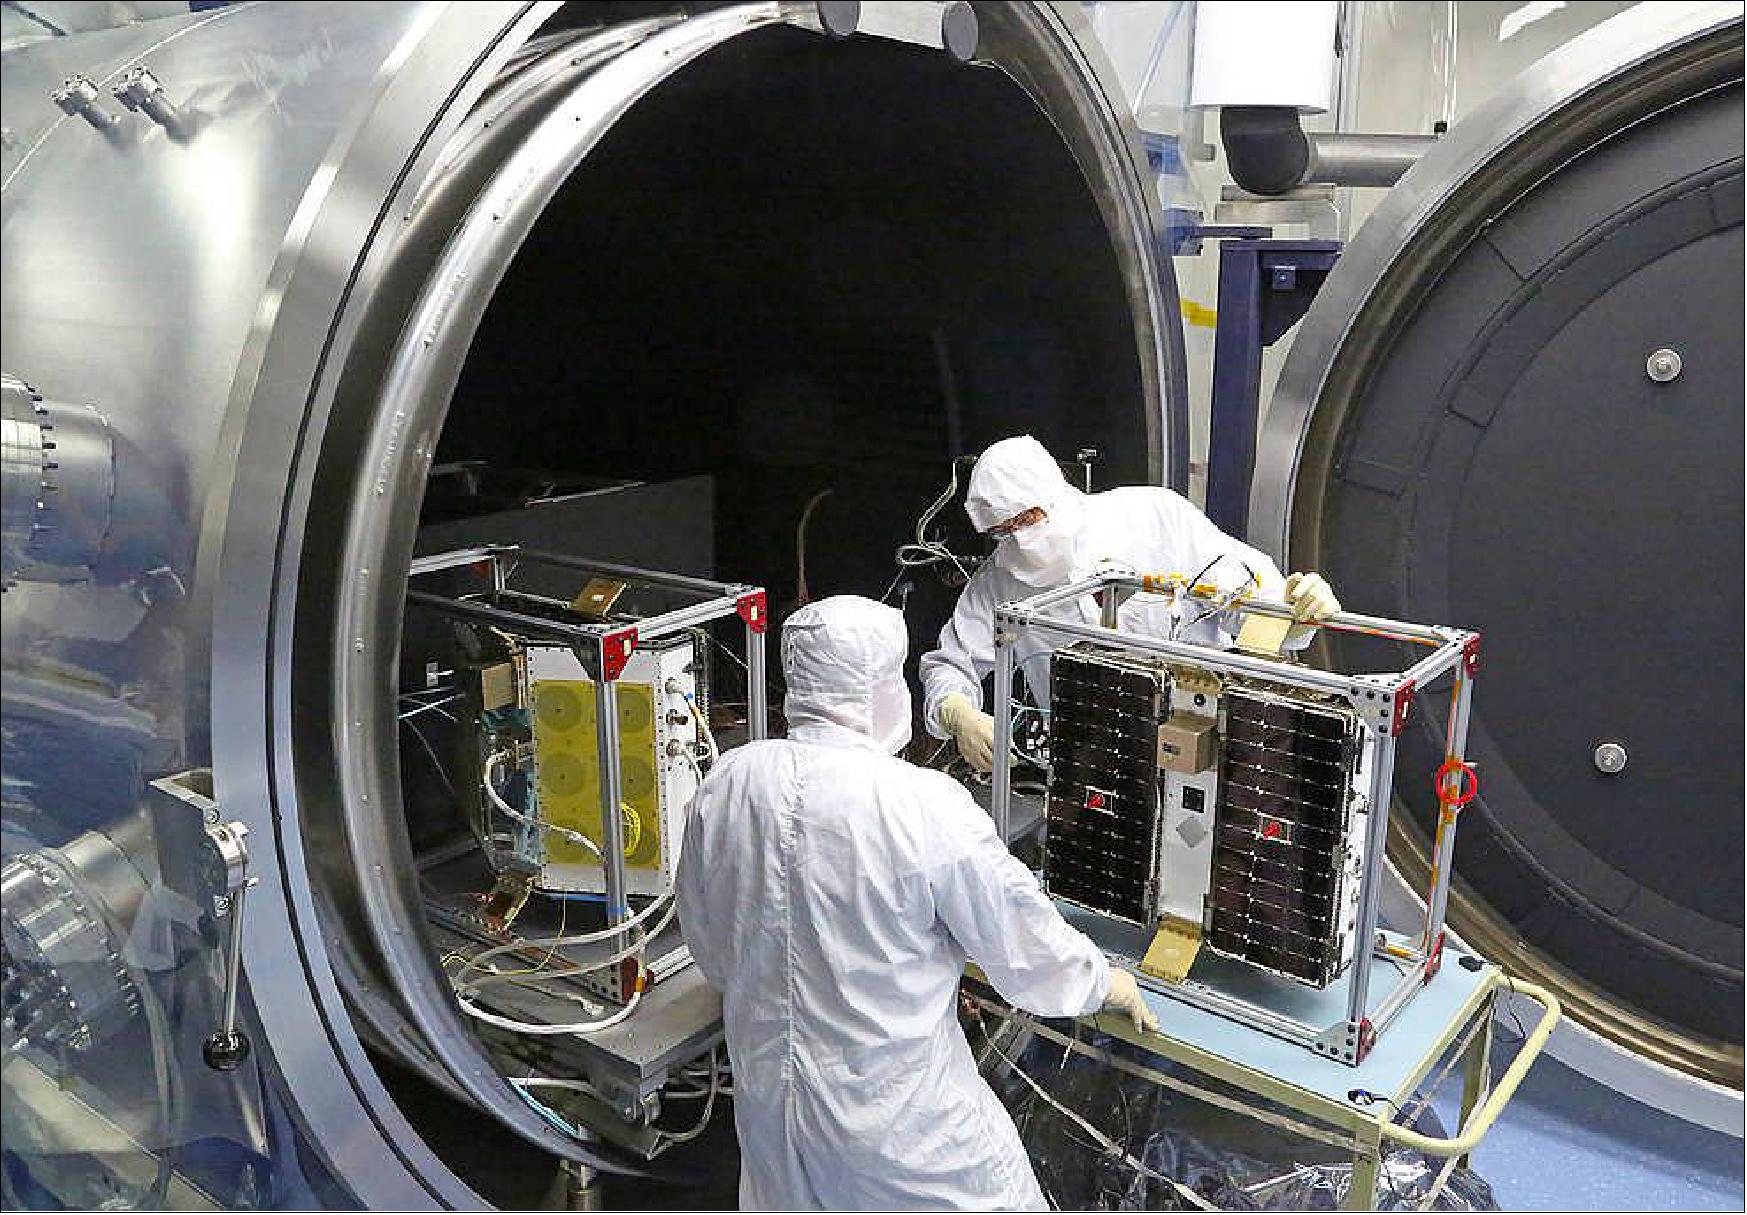 Figure 10: Thermal vacuum (shown) and other environmental tests of the CYGNSS microsatellites wrapped last month at the SwRI in San Antonio, Texas. The final series of tests will soon commence on all eight observatories, stacked in the final launch configuration (image credit: Southwest Research Institute)